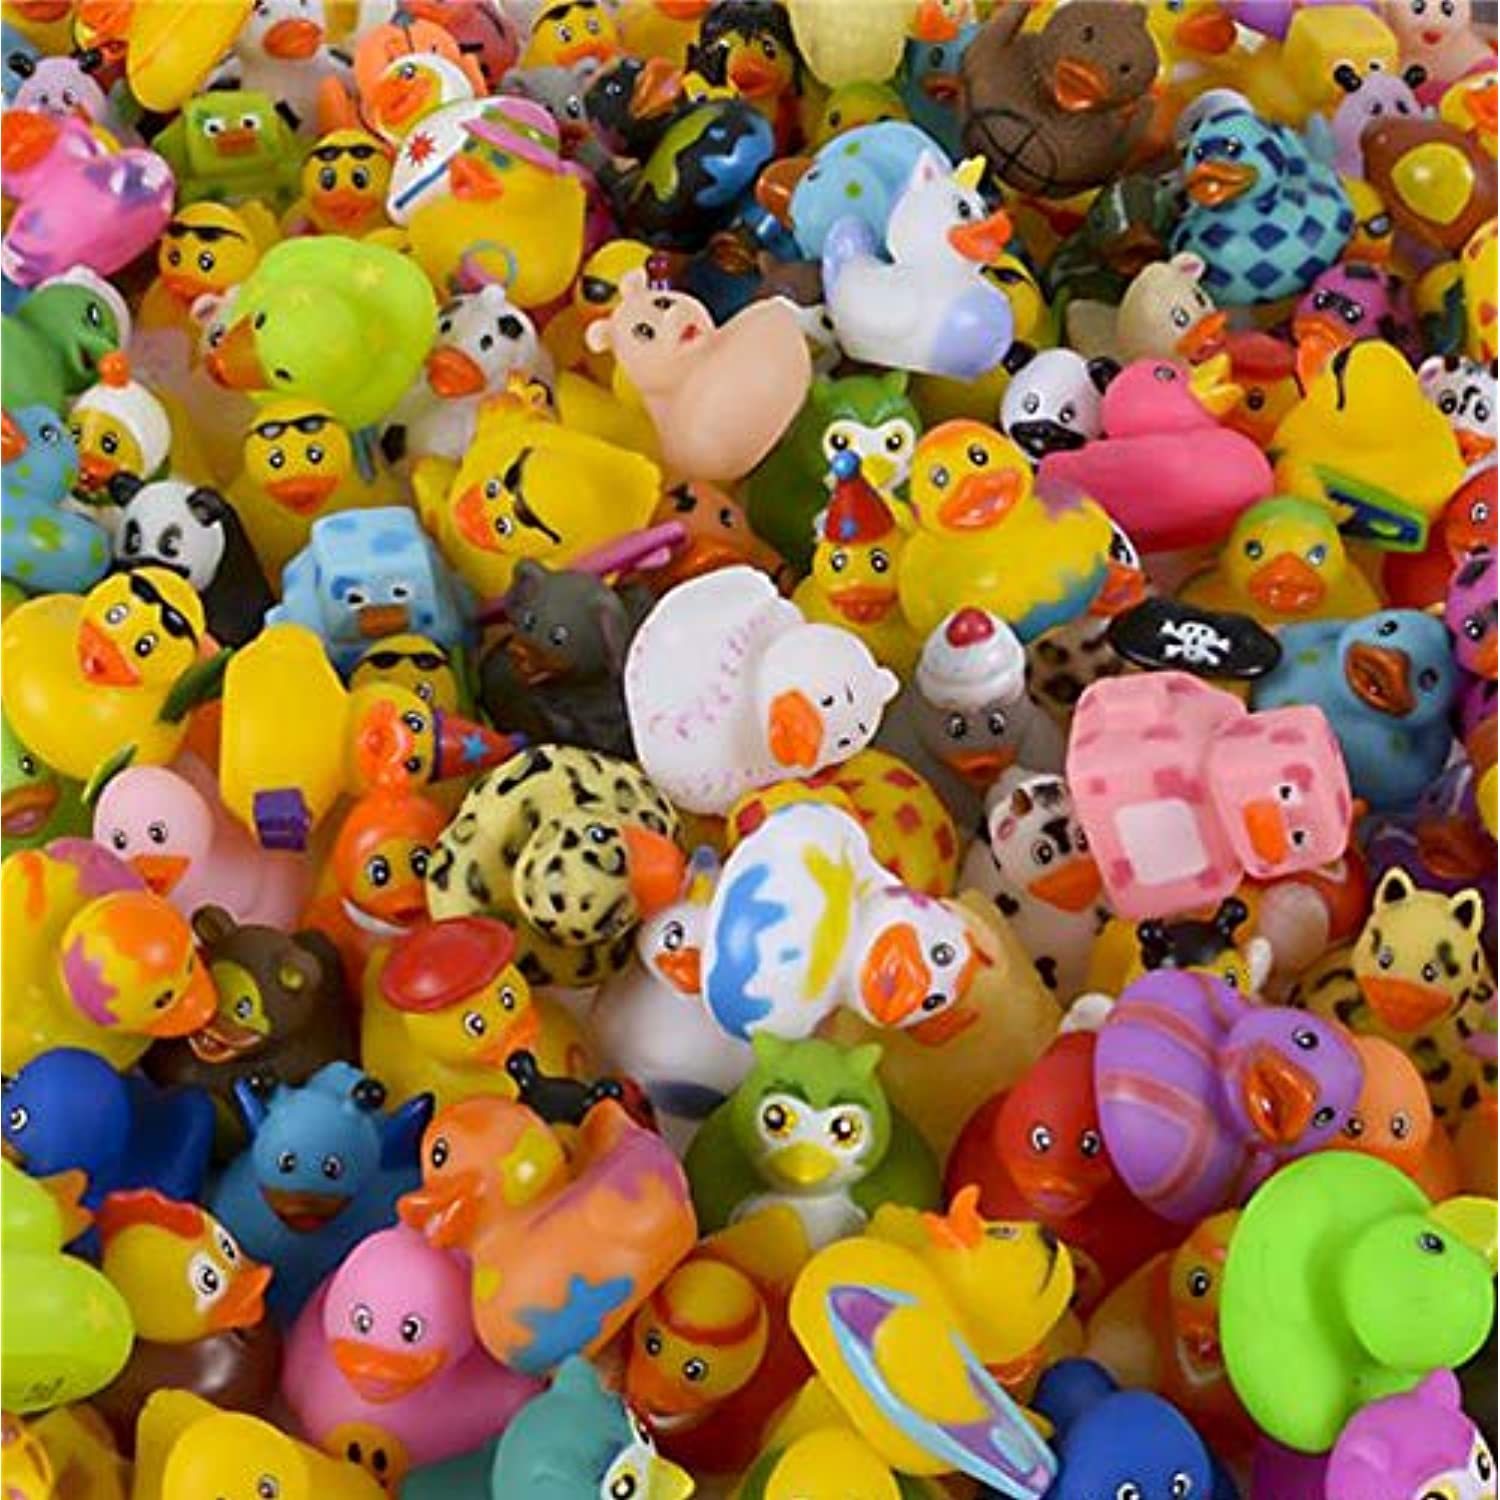 Assortment Rubber Duck Toy Duckies For Kids, Bath Birthday Gifts Baby